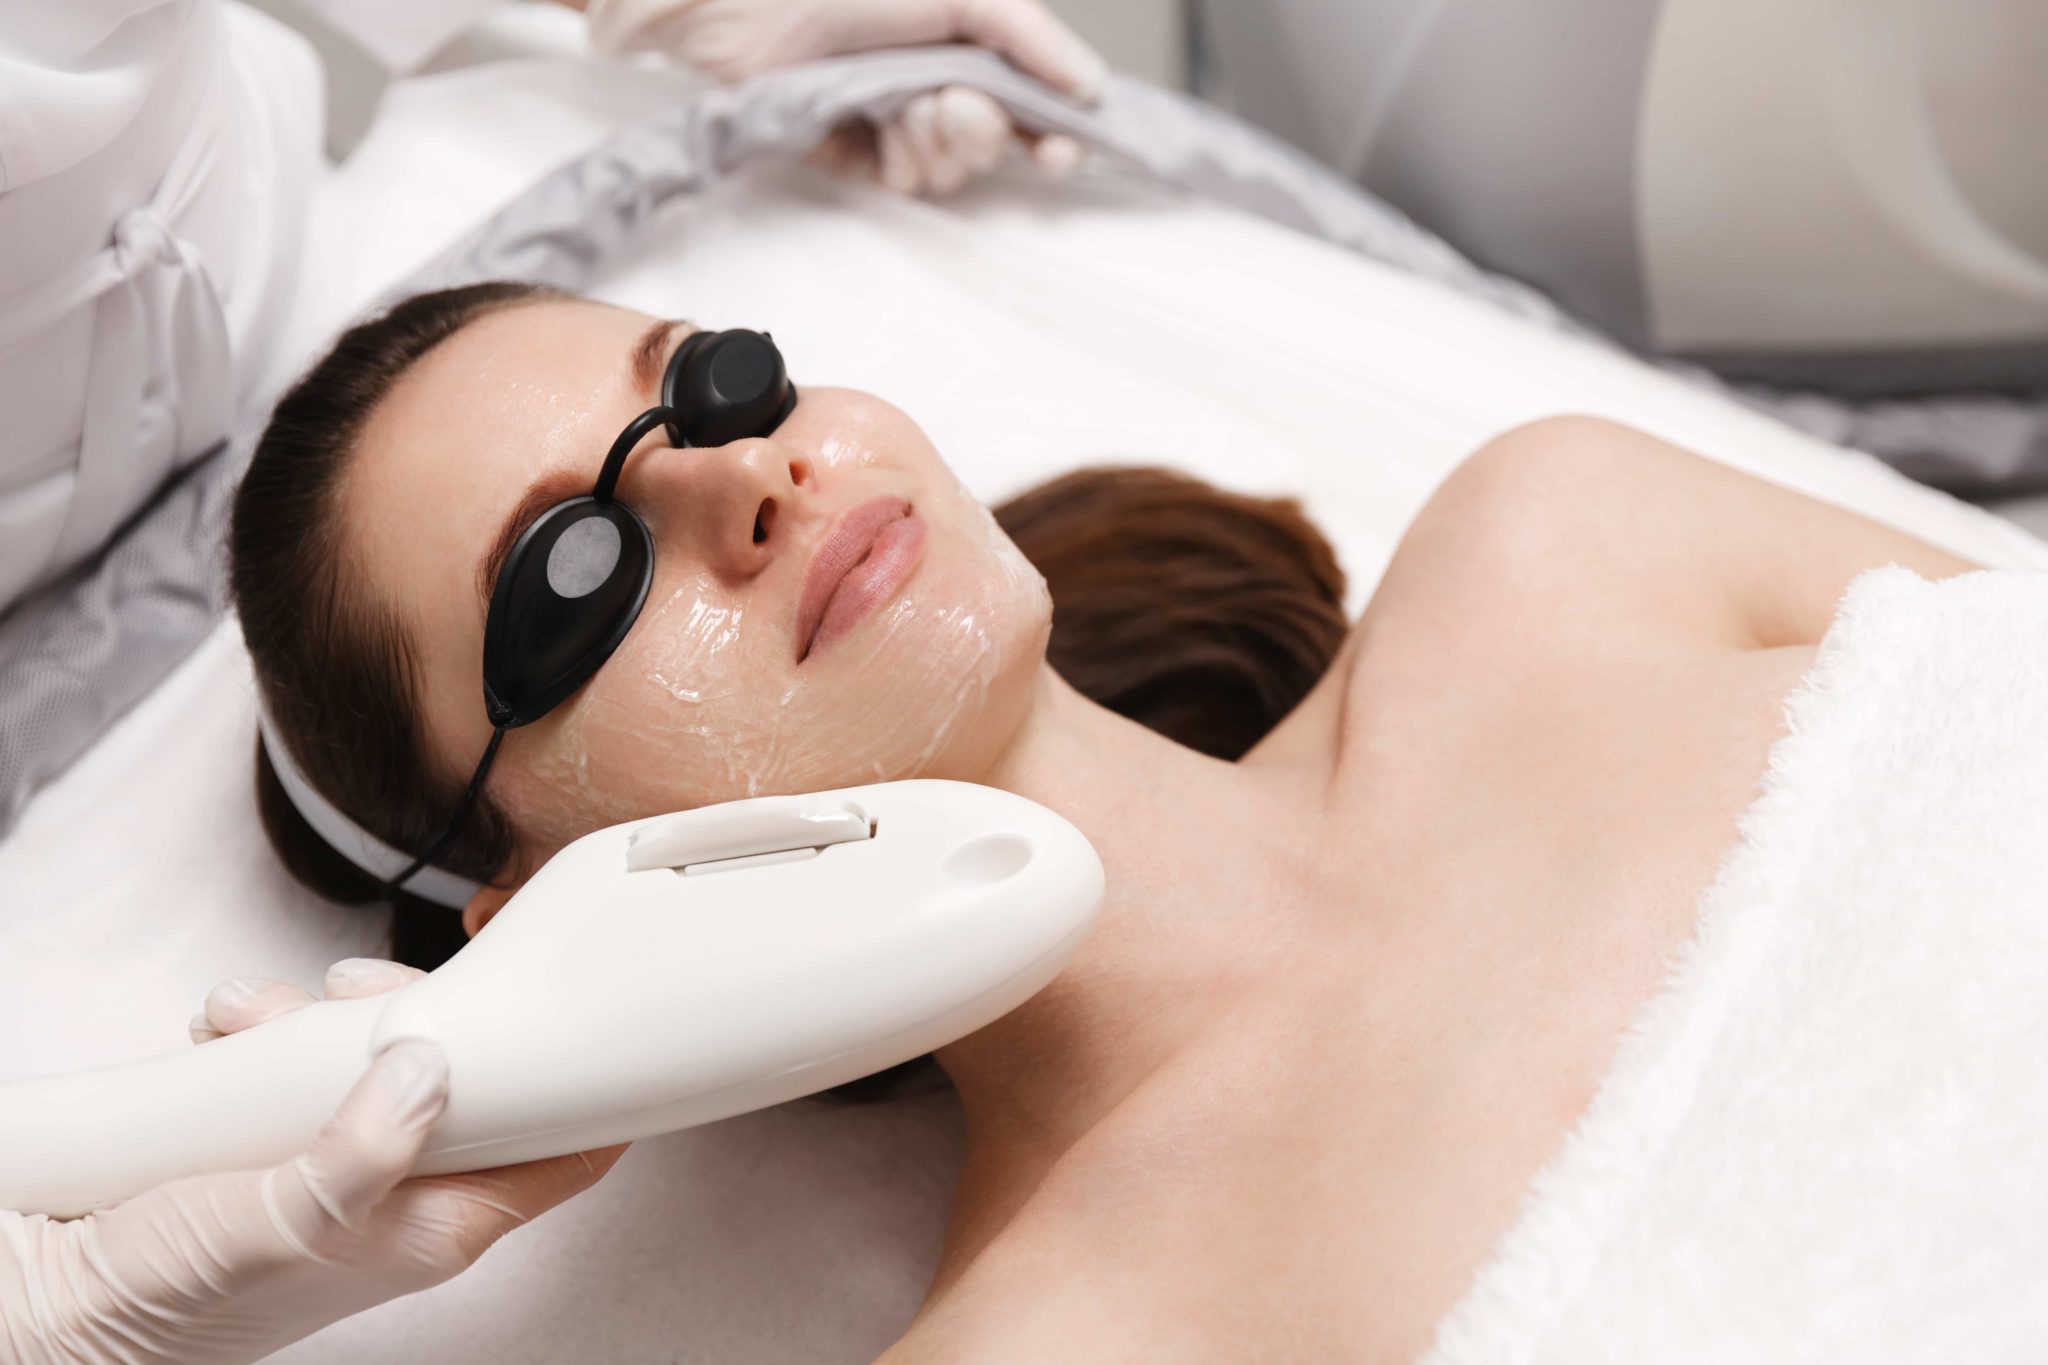 How Long Does It Take For IPL Photofacial Treatments To Work?